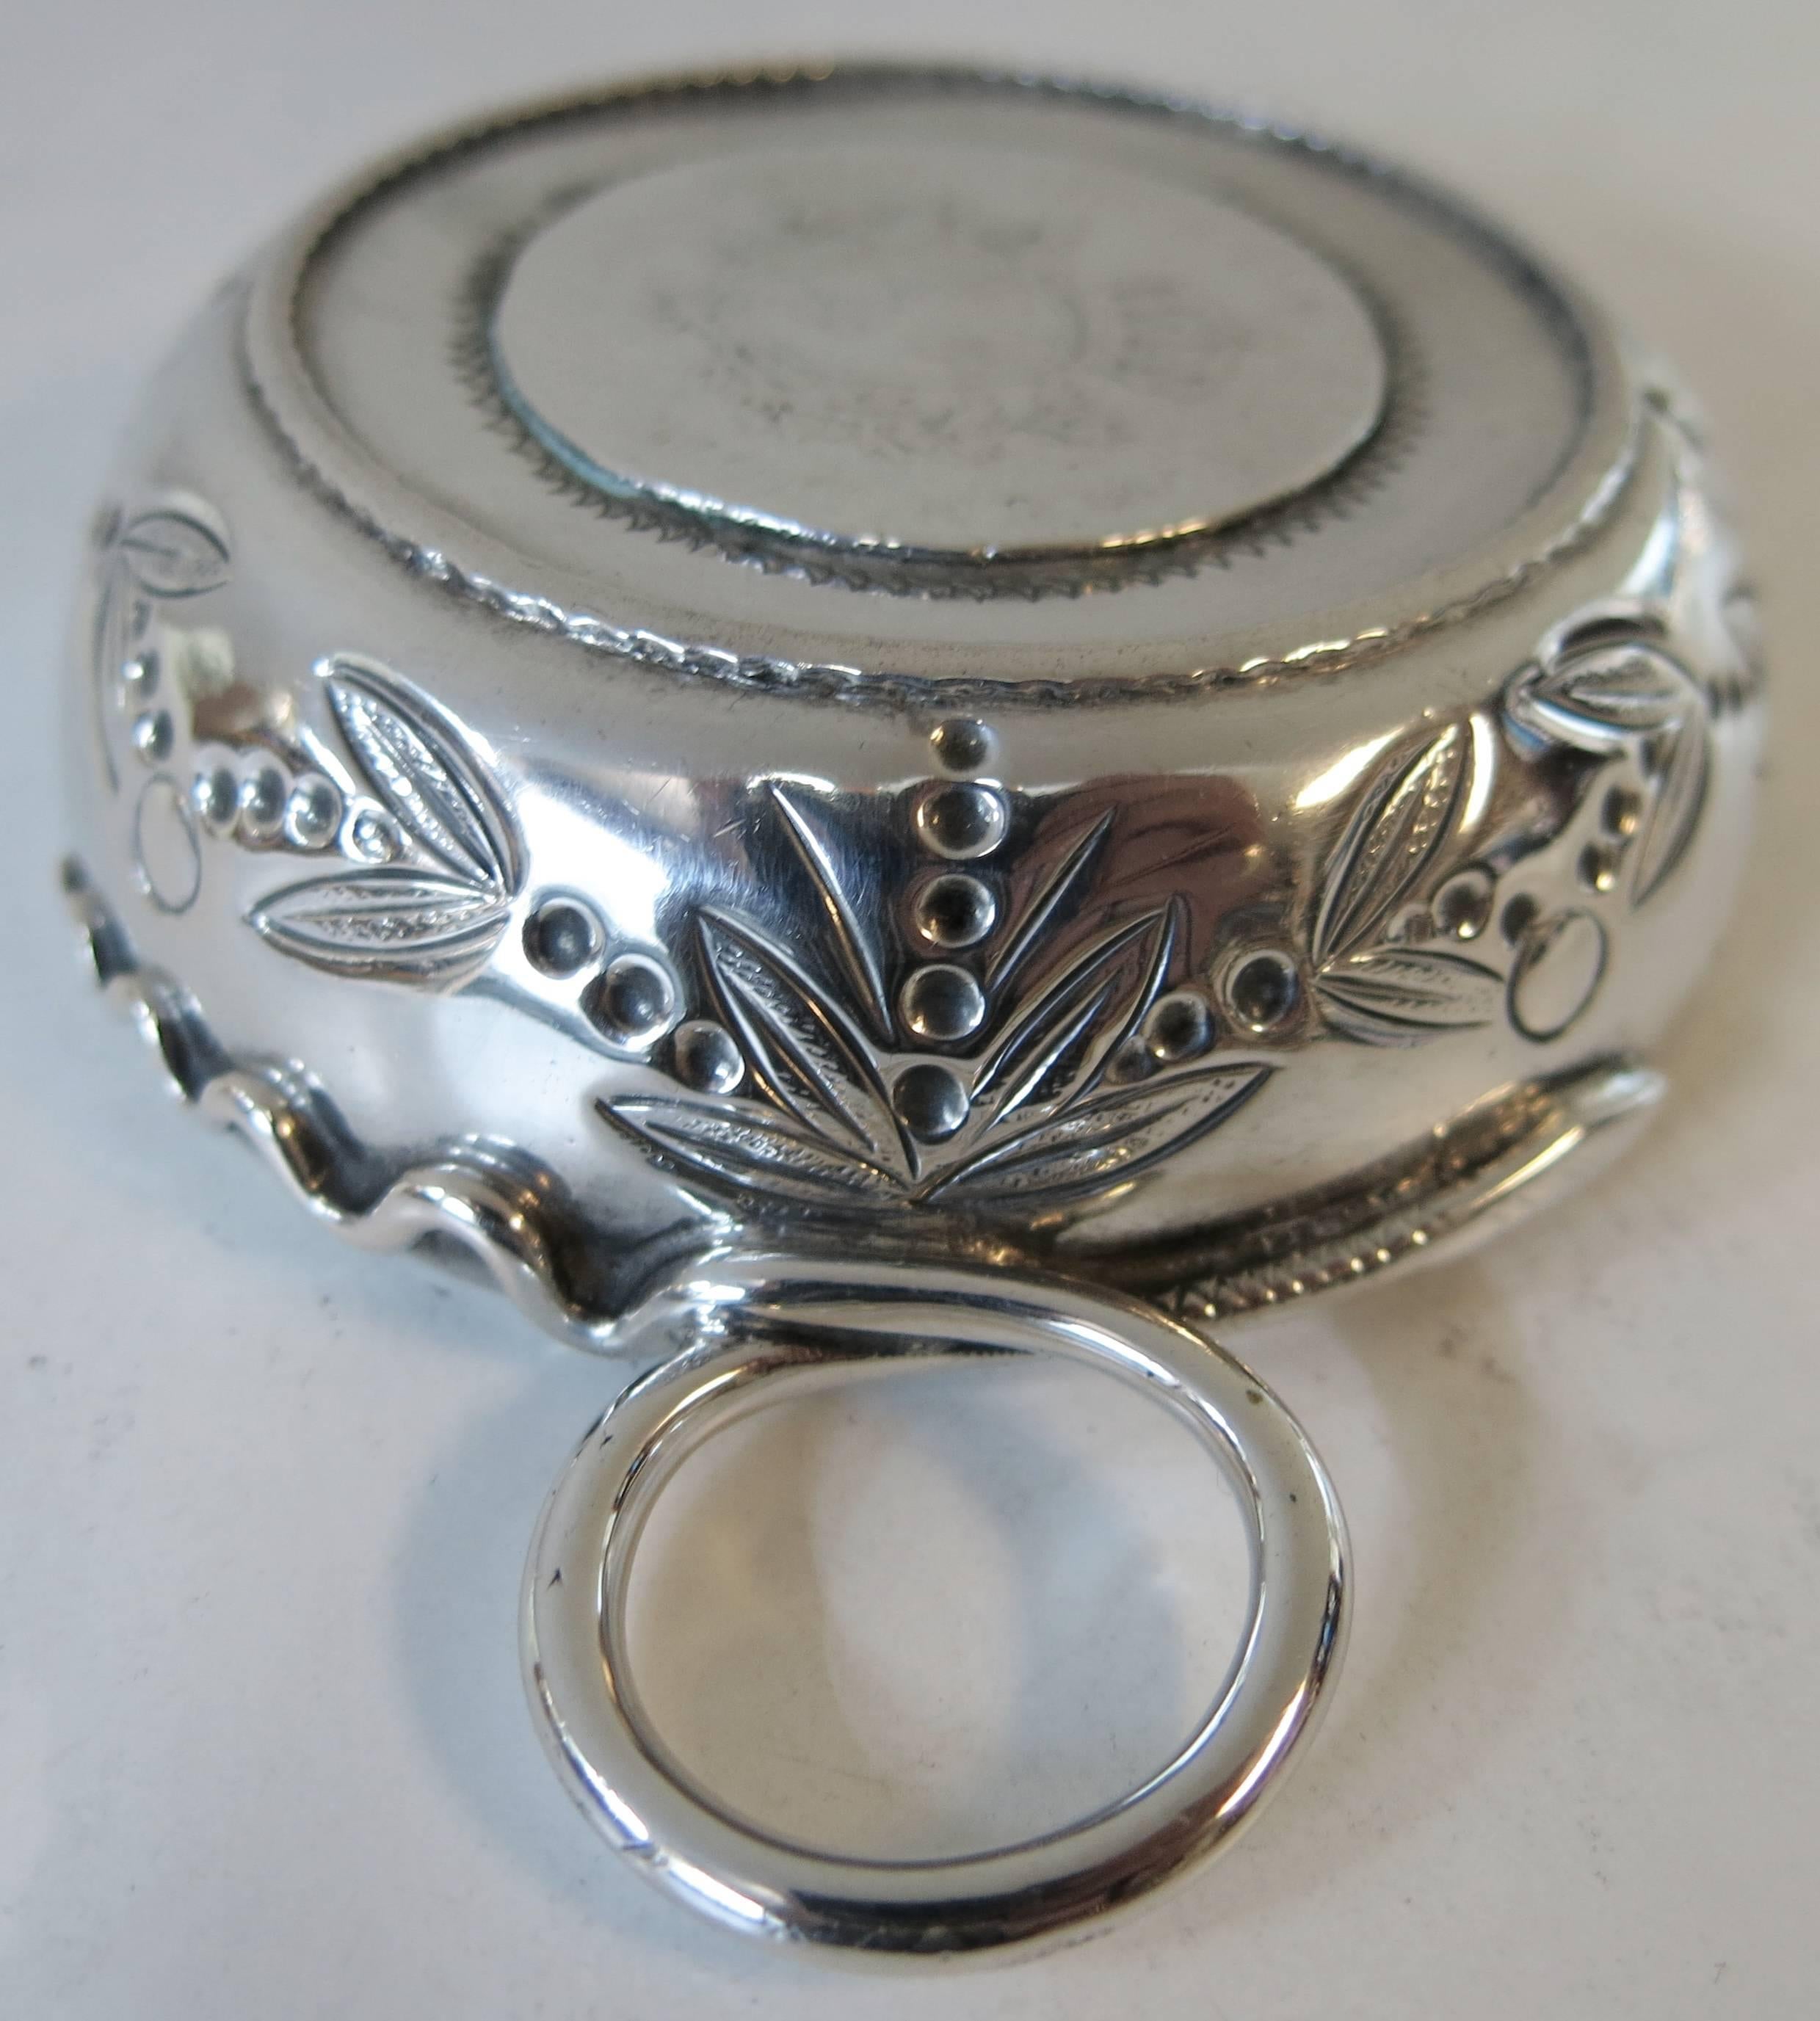 French, antique, sterling silver taste de vin / tastevin / wine taster, with snake
handle and Louis XV coin inset into base.